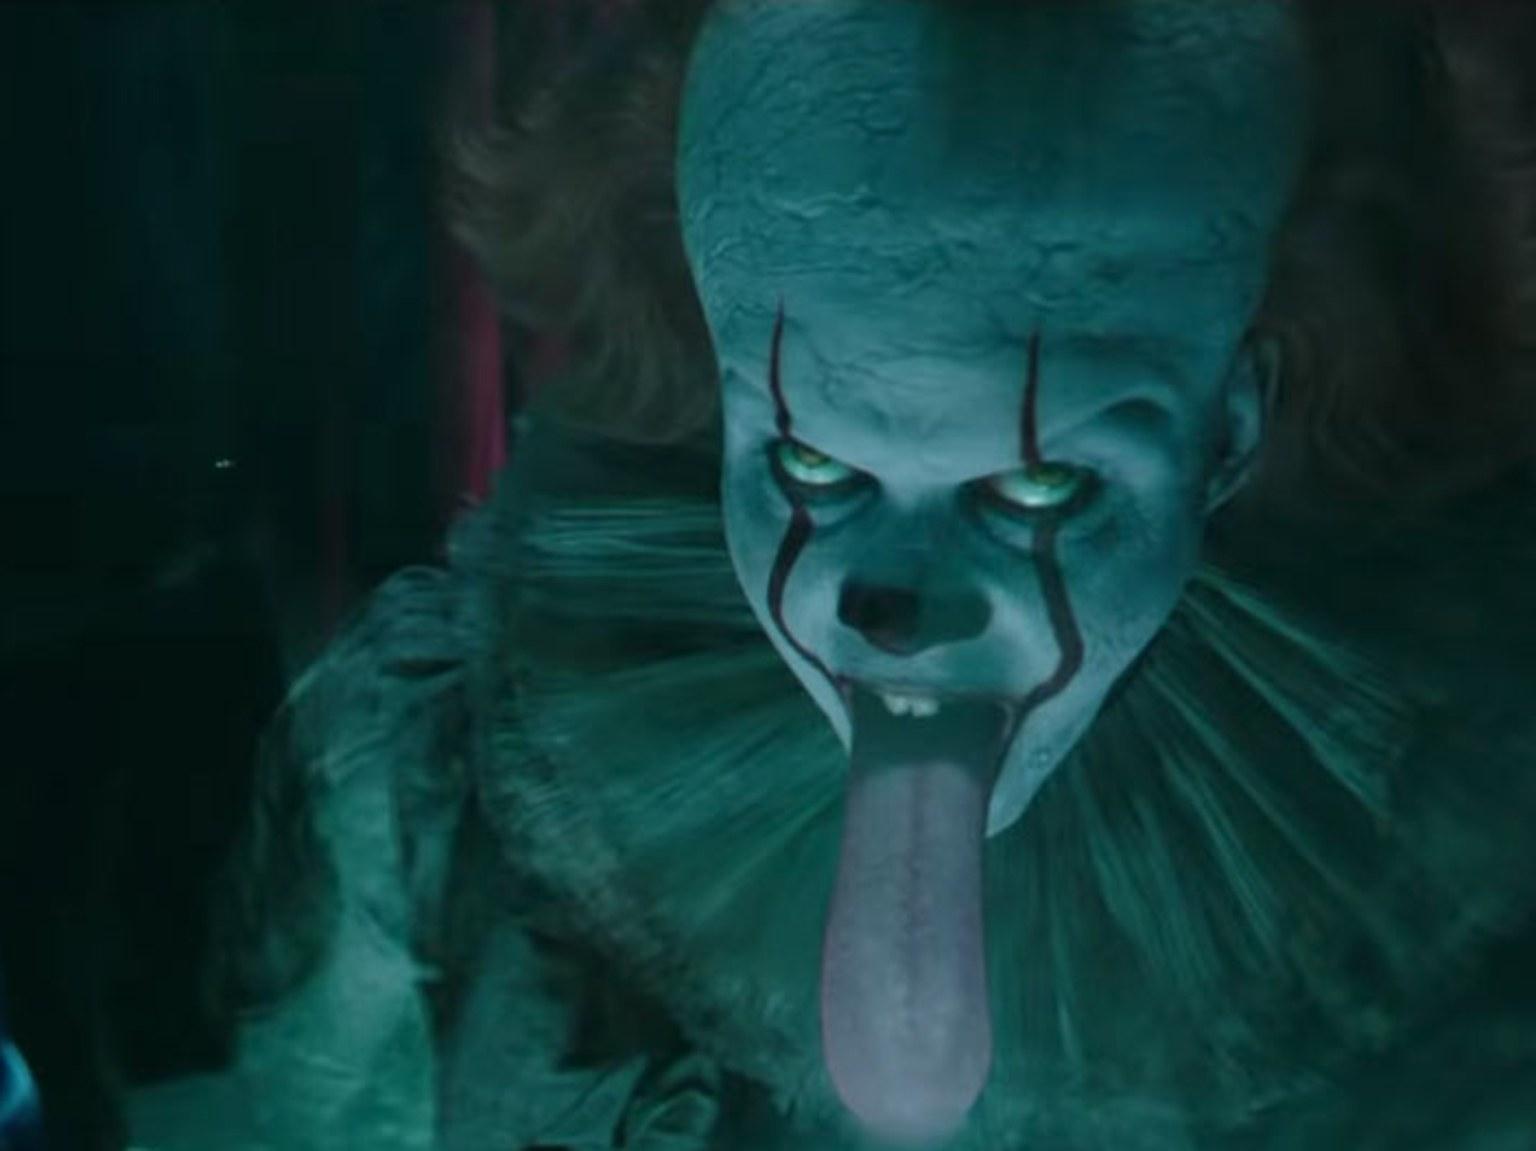 It Chapter 2 Trailer Stars Jessica Chastain and Pennywise's Tongue